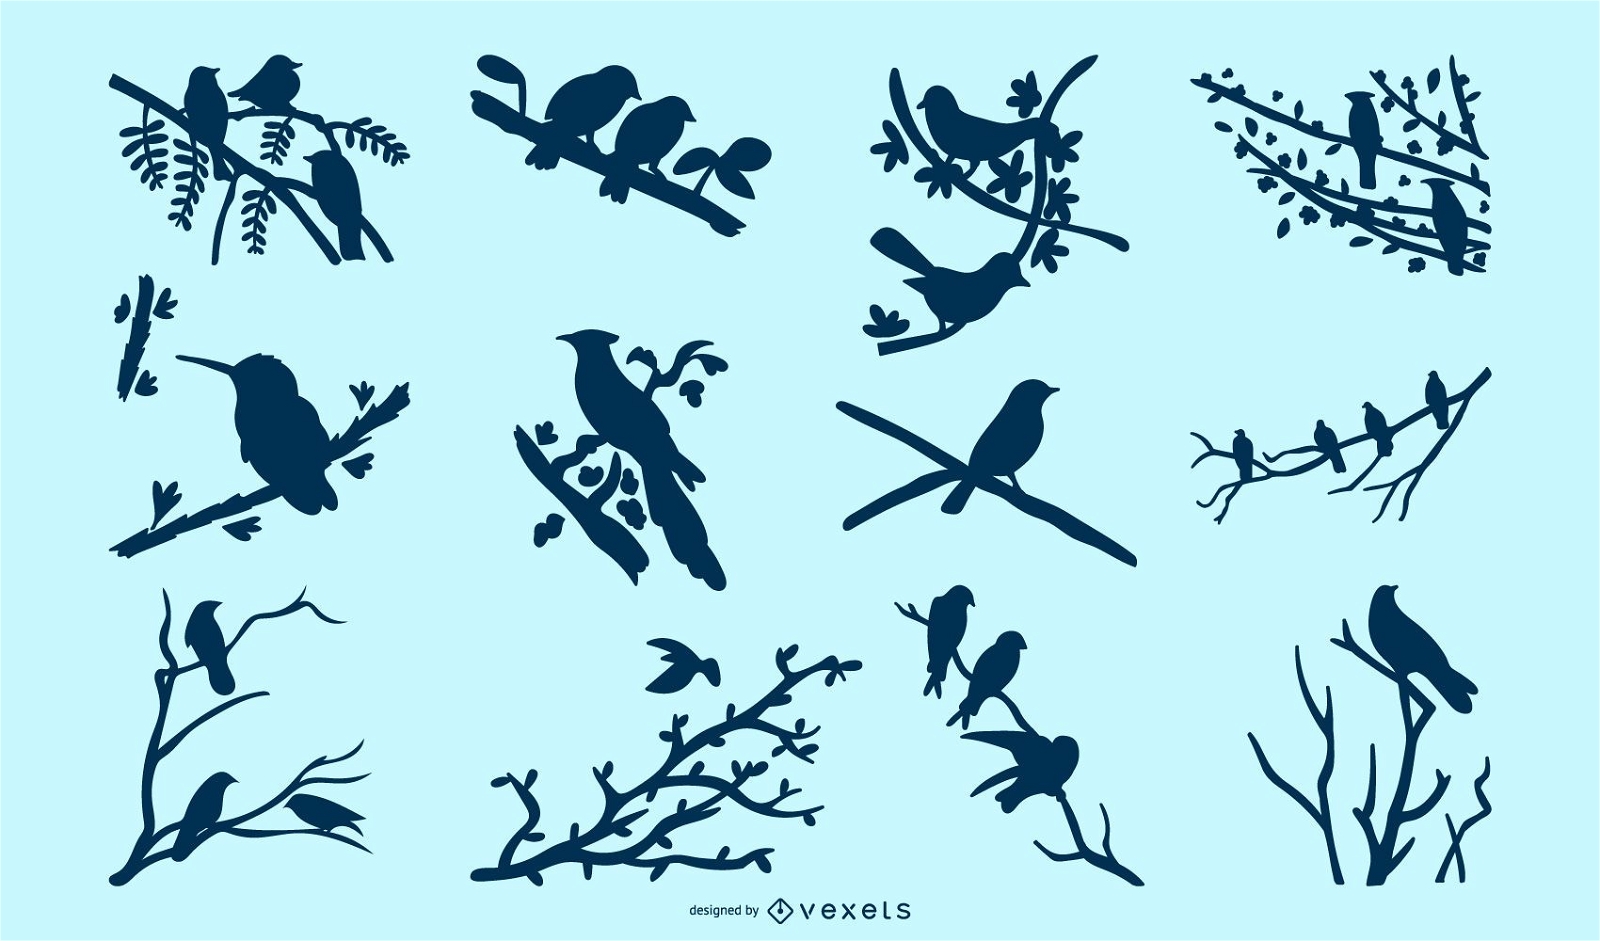 Birds on Tree Branches Silhouette Pack